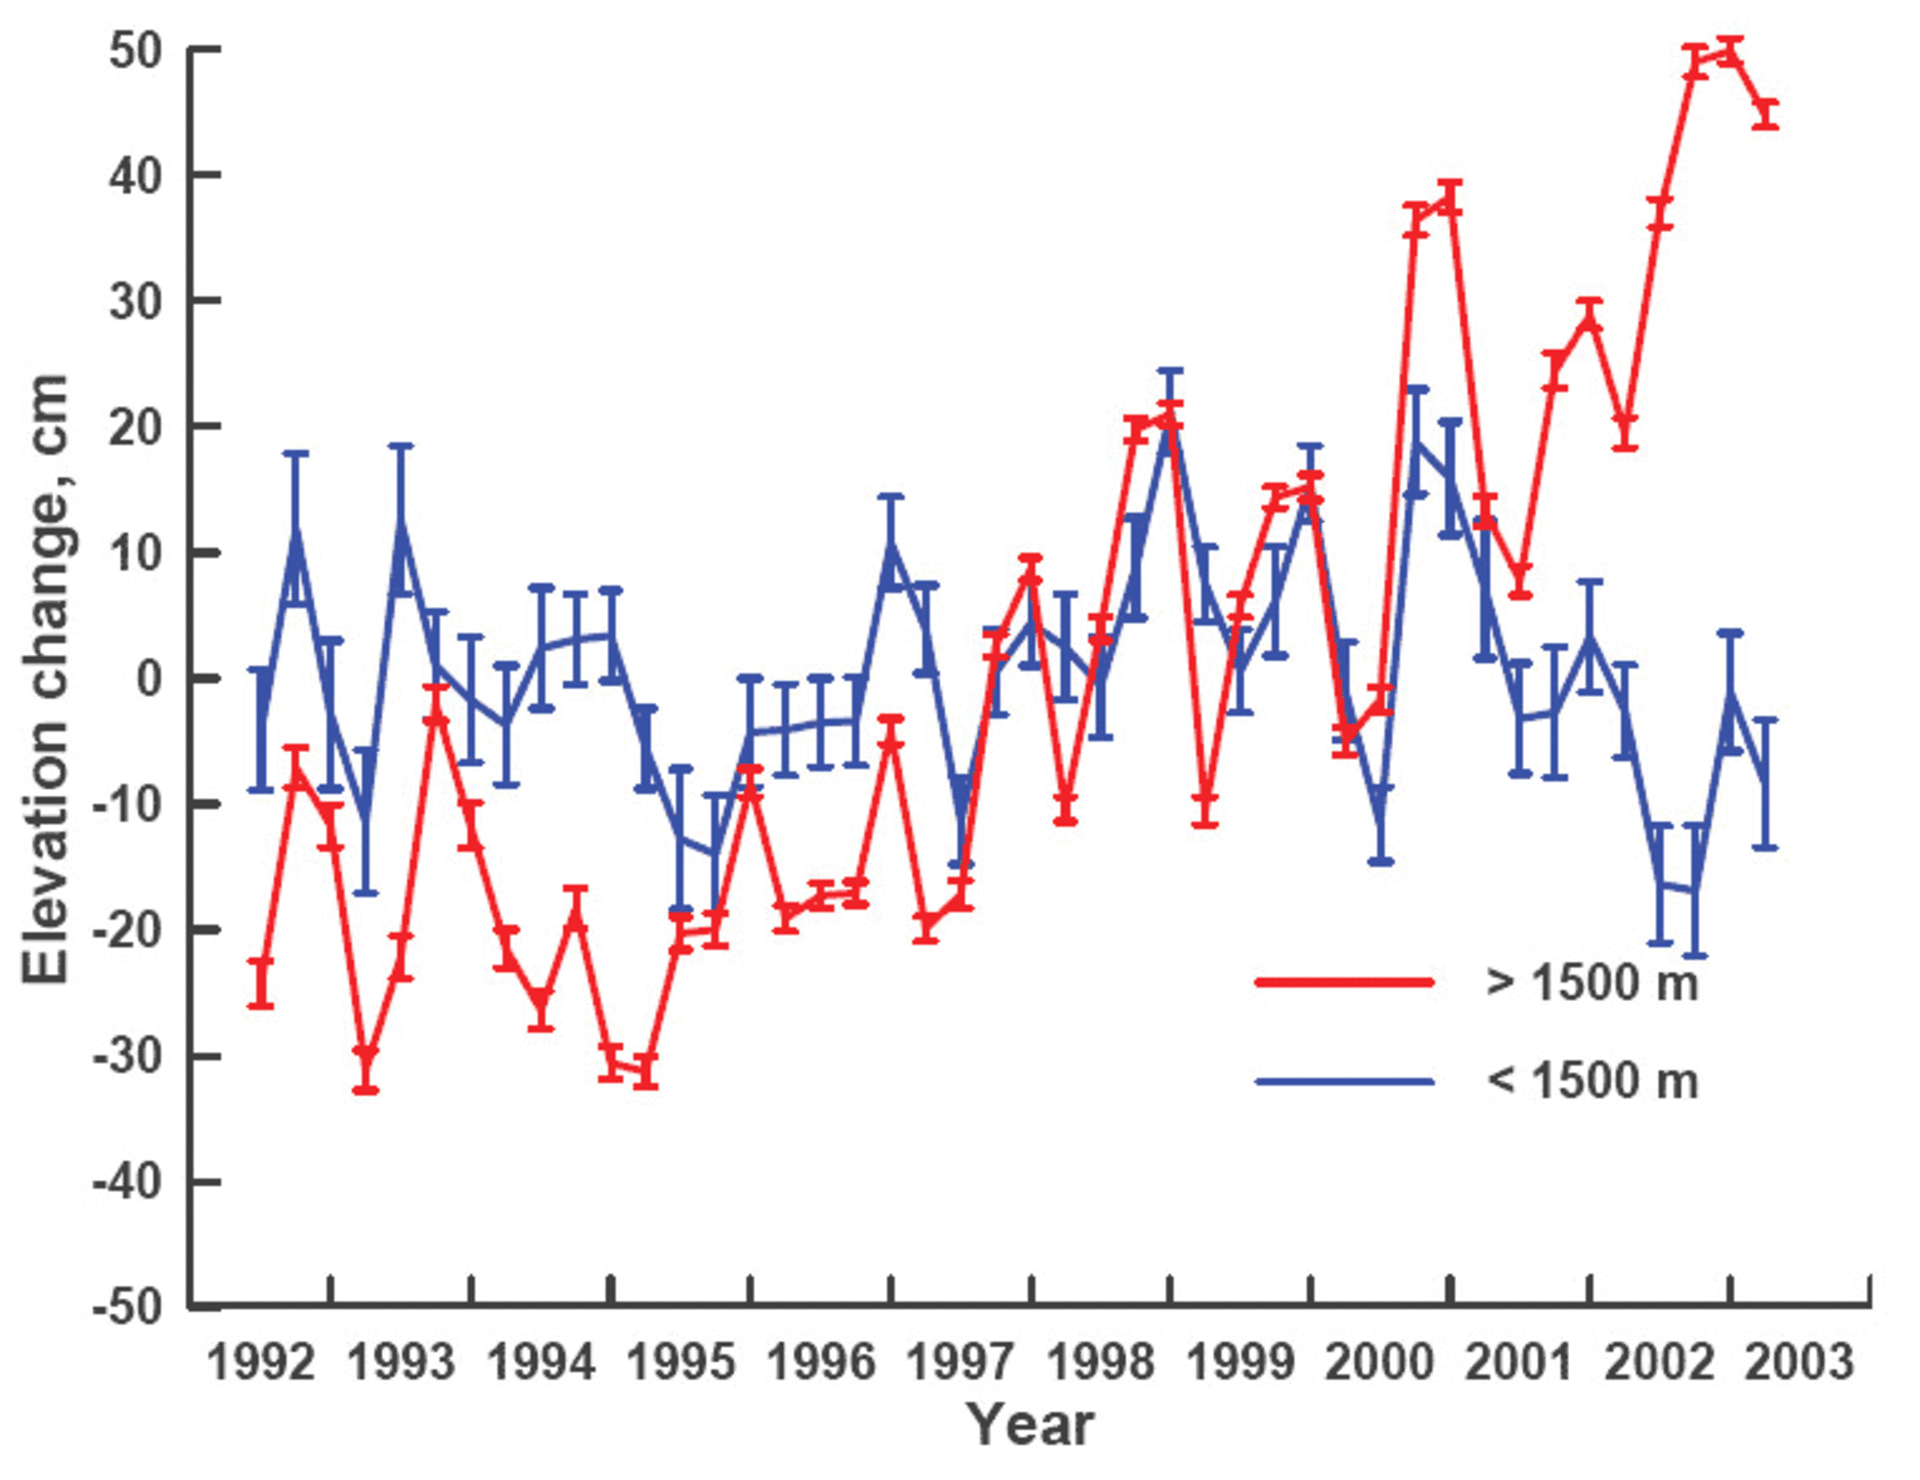 Changes in Greenland Ice Sheet elevation, above and below 1500 m